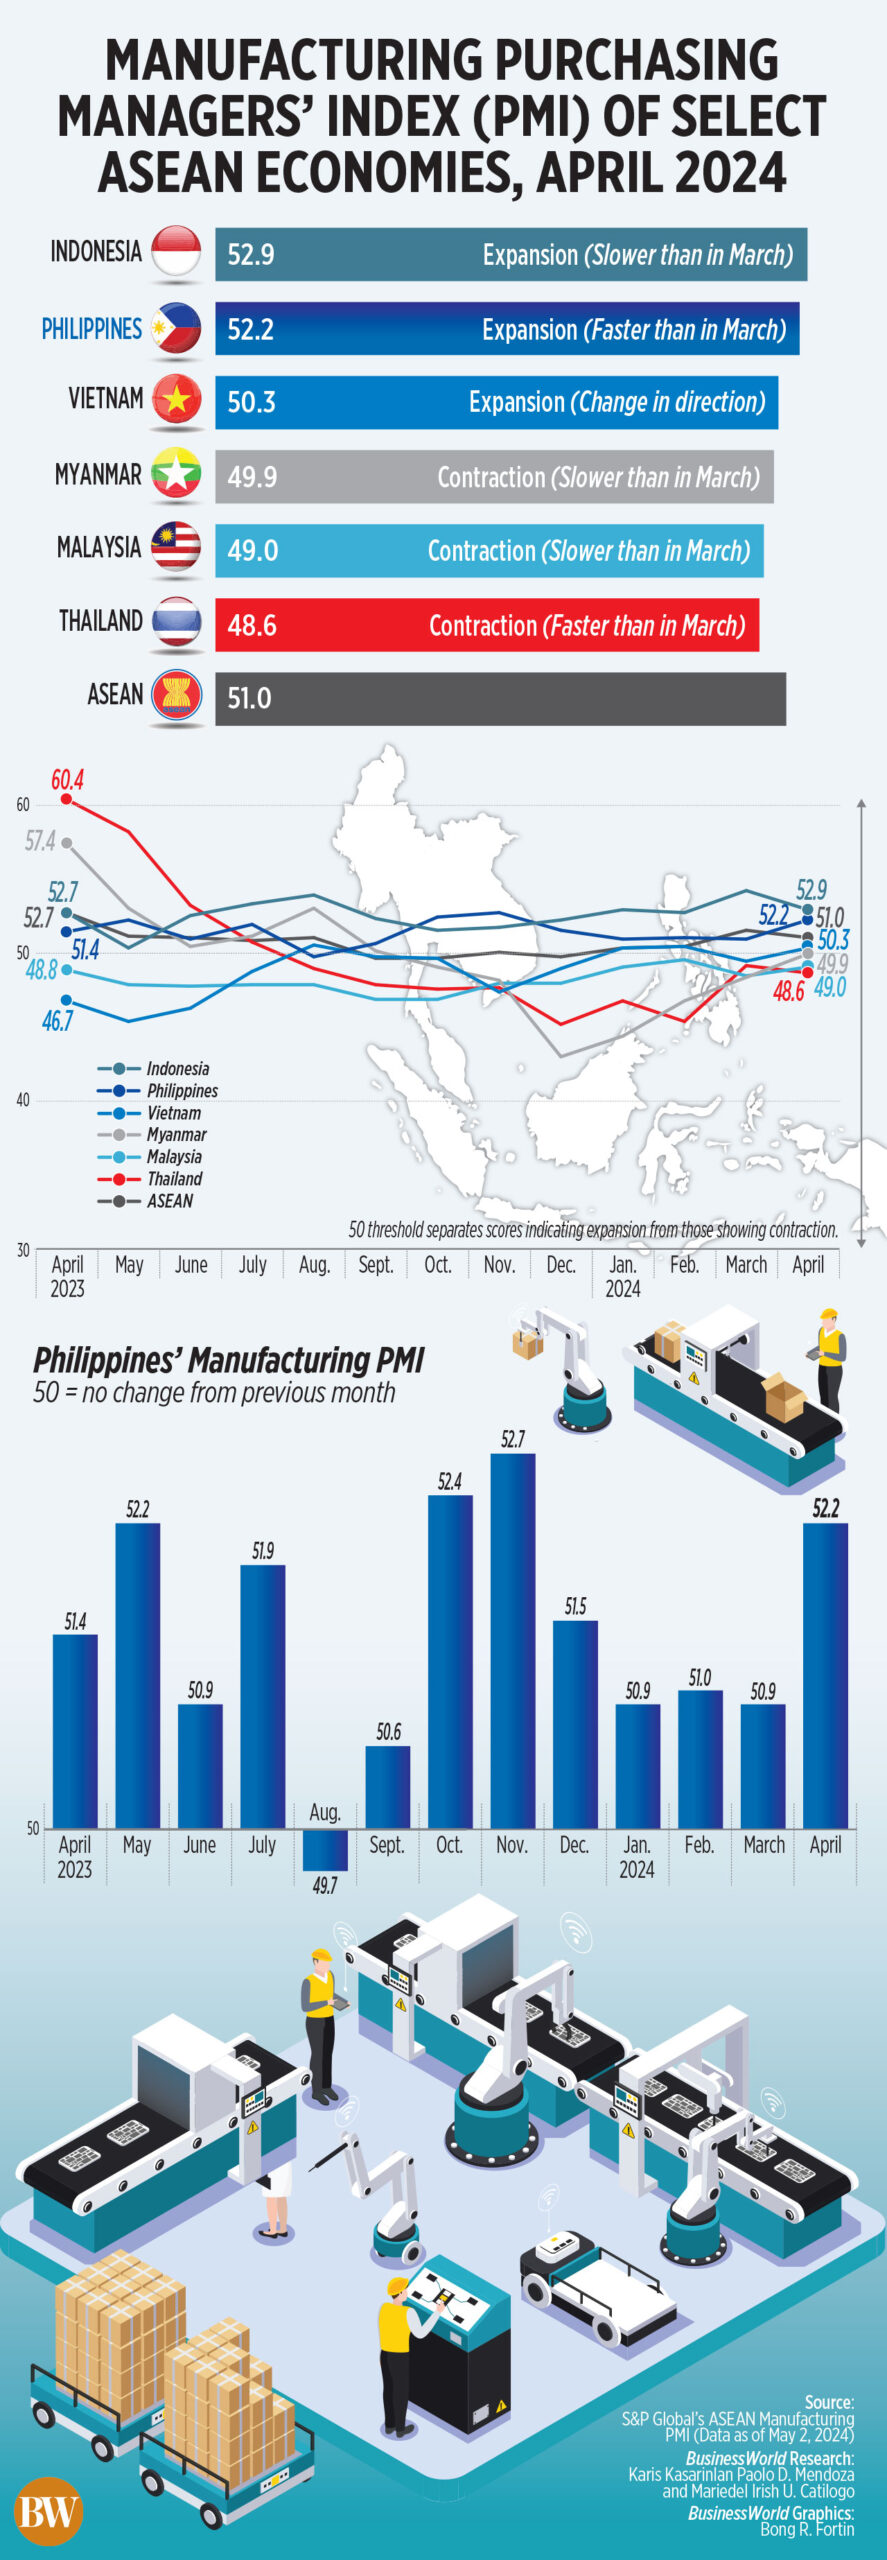 Manufacturing Purchasing Managers' Index (PMI) of selected ASEAN economies, April 2024